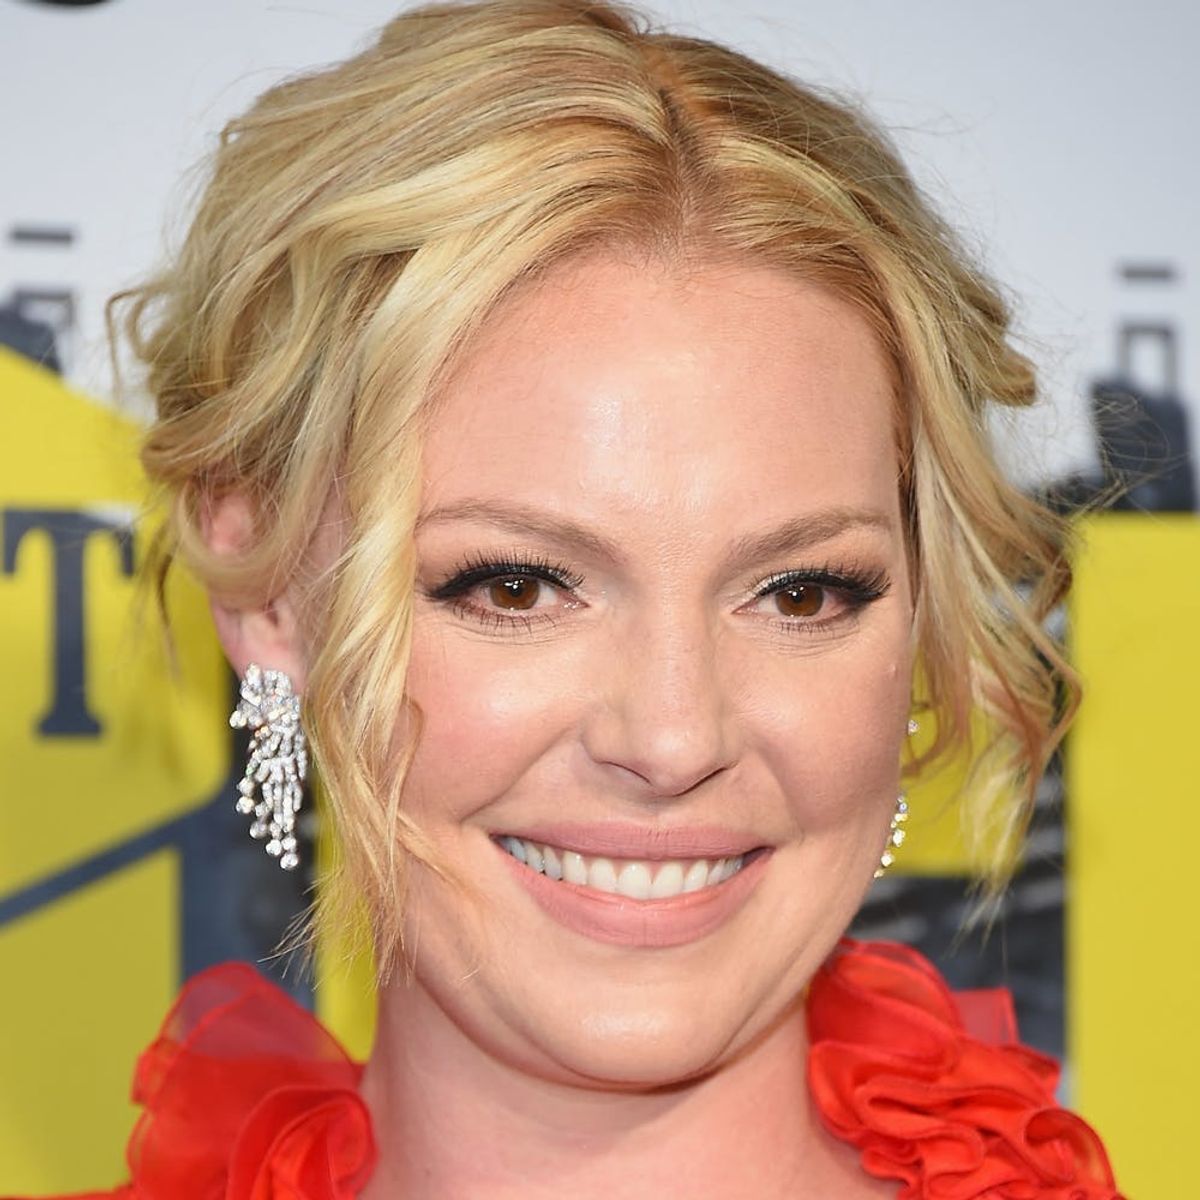 Katherine Heigl Will Make Her Comedy Debut in New CBS Pilot ‘Our House’ About a Dysfunctional Family